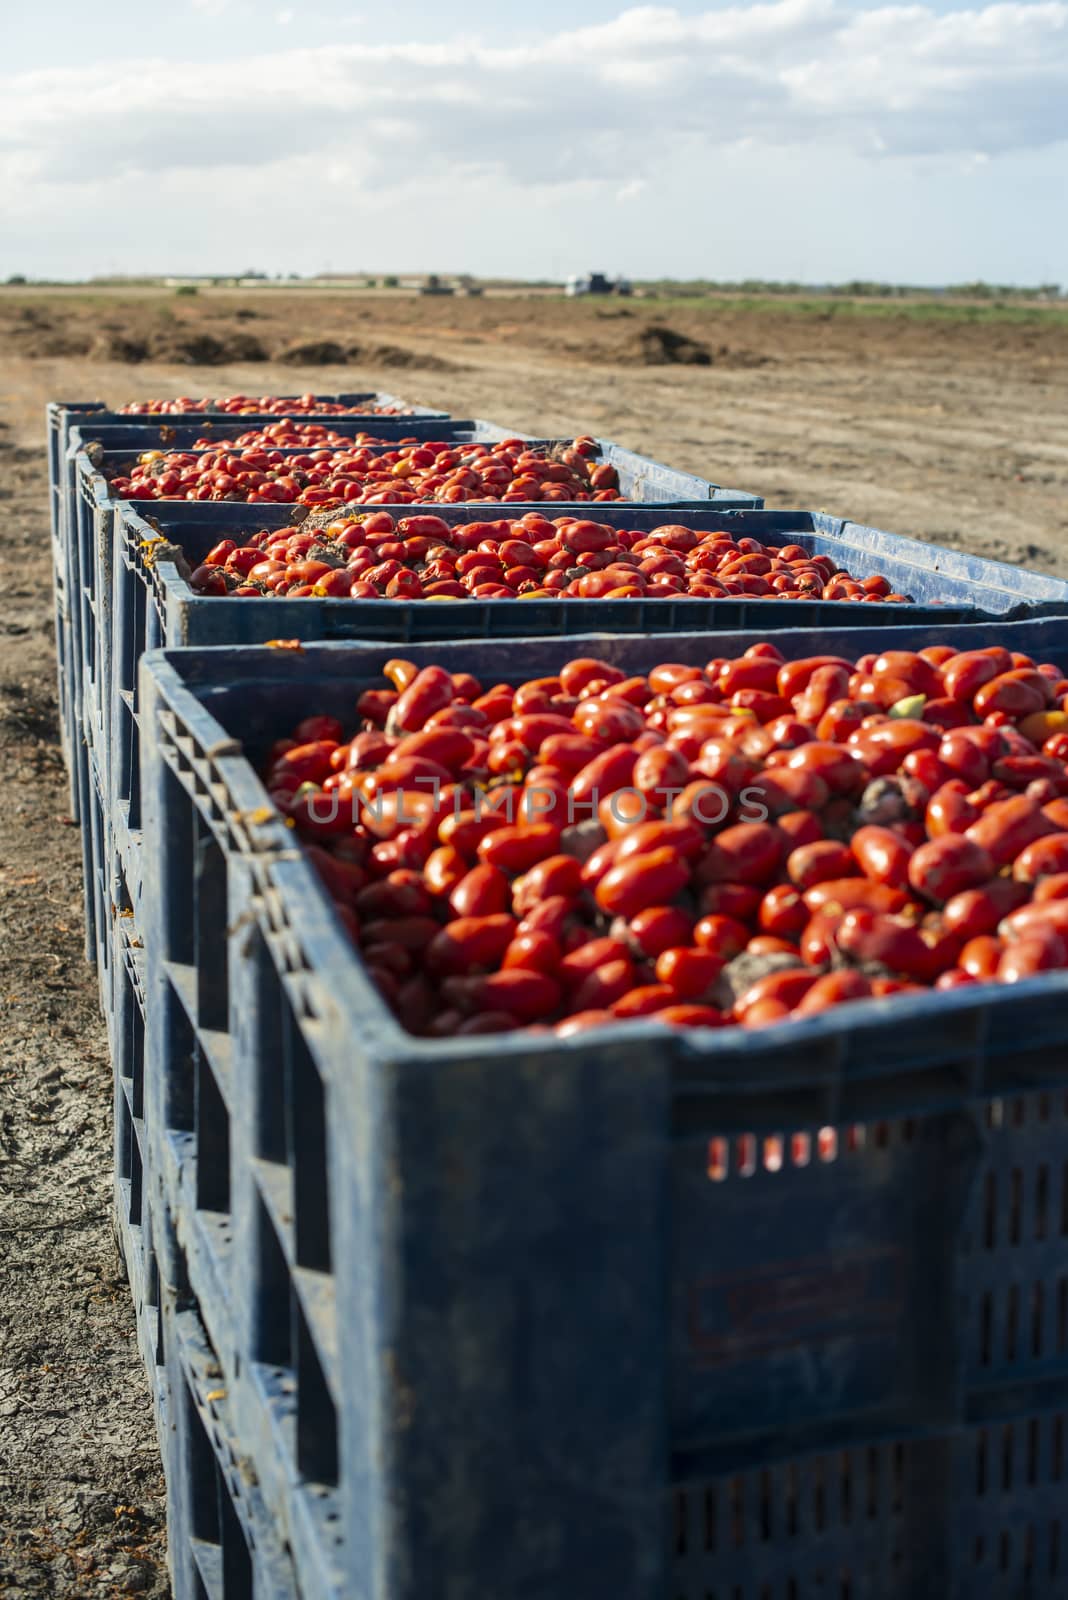 Big crates with tomatoes. Farm for growing tomatoes for canning industry.